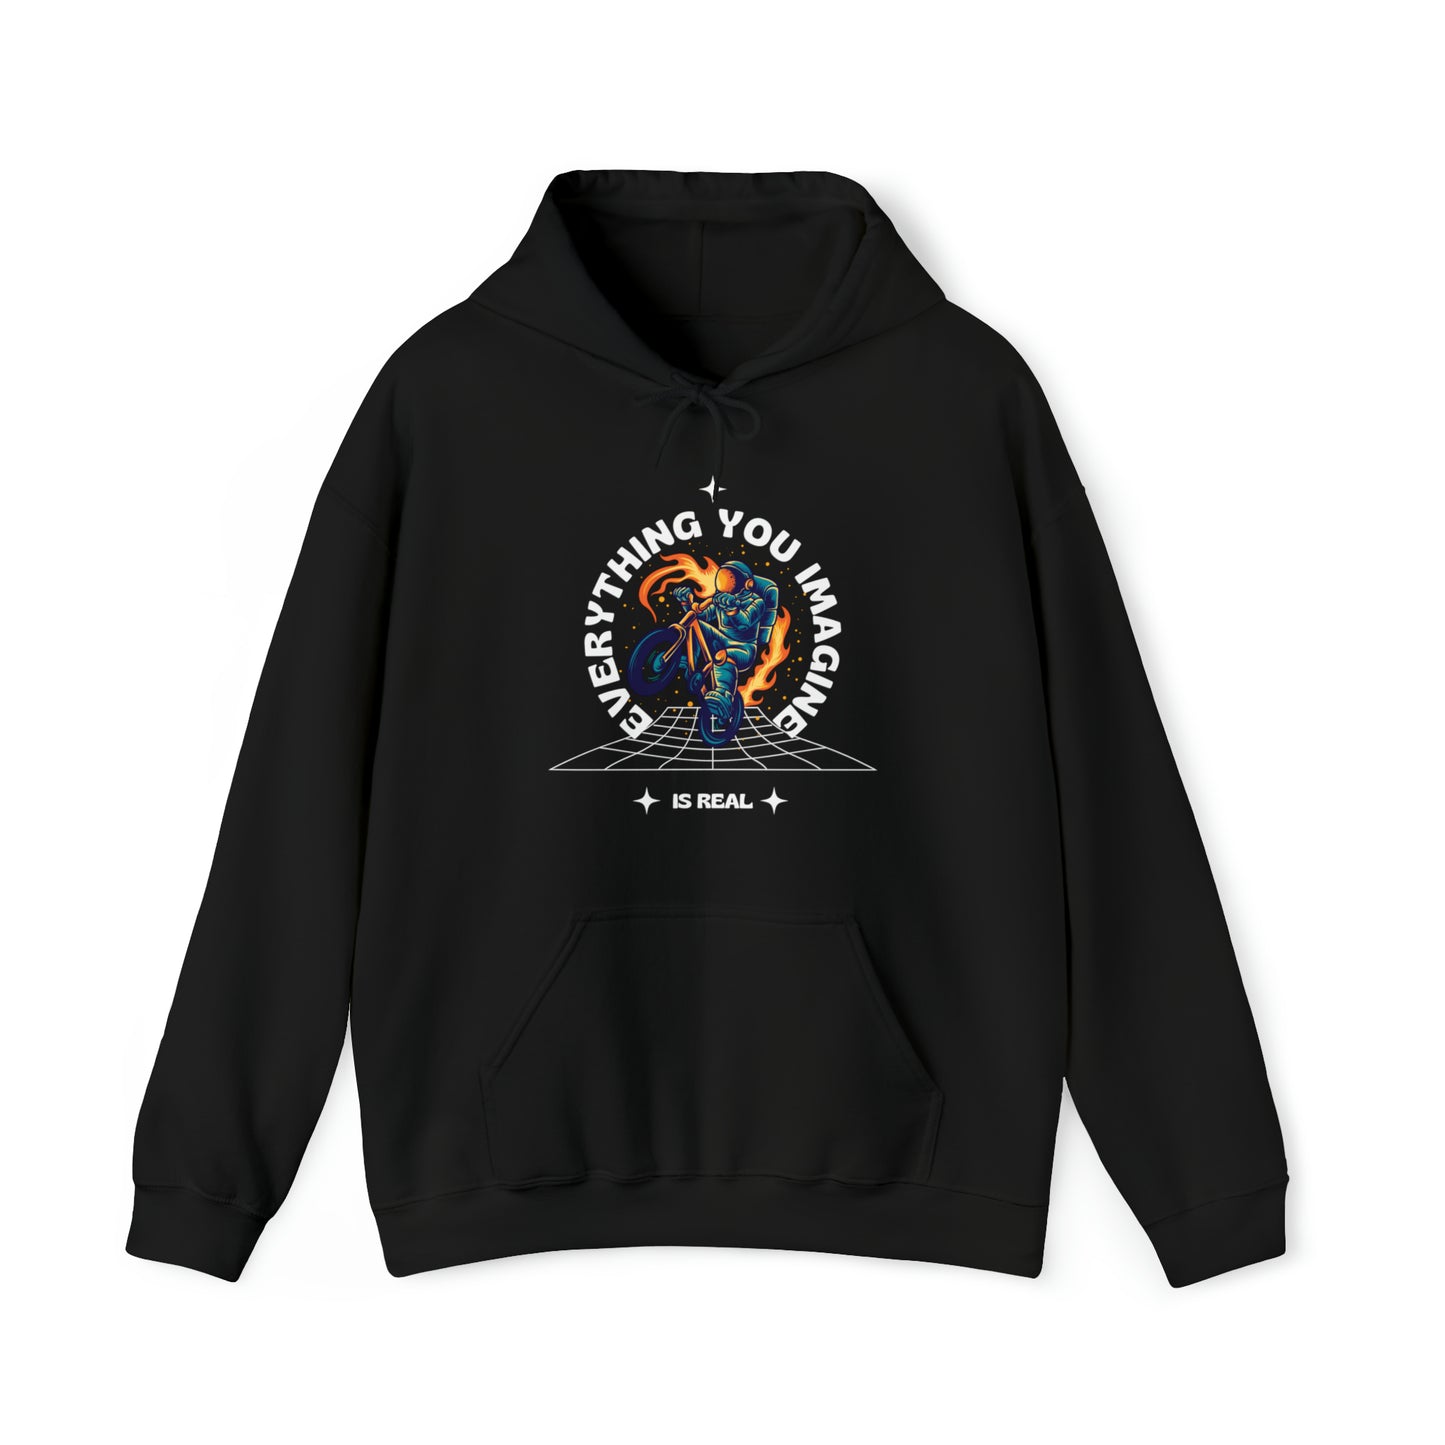 Everything you imagine is real! Heavy blend hoodie